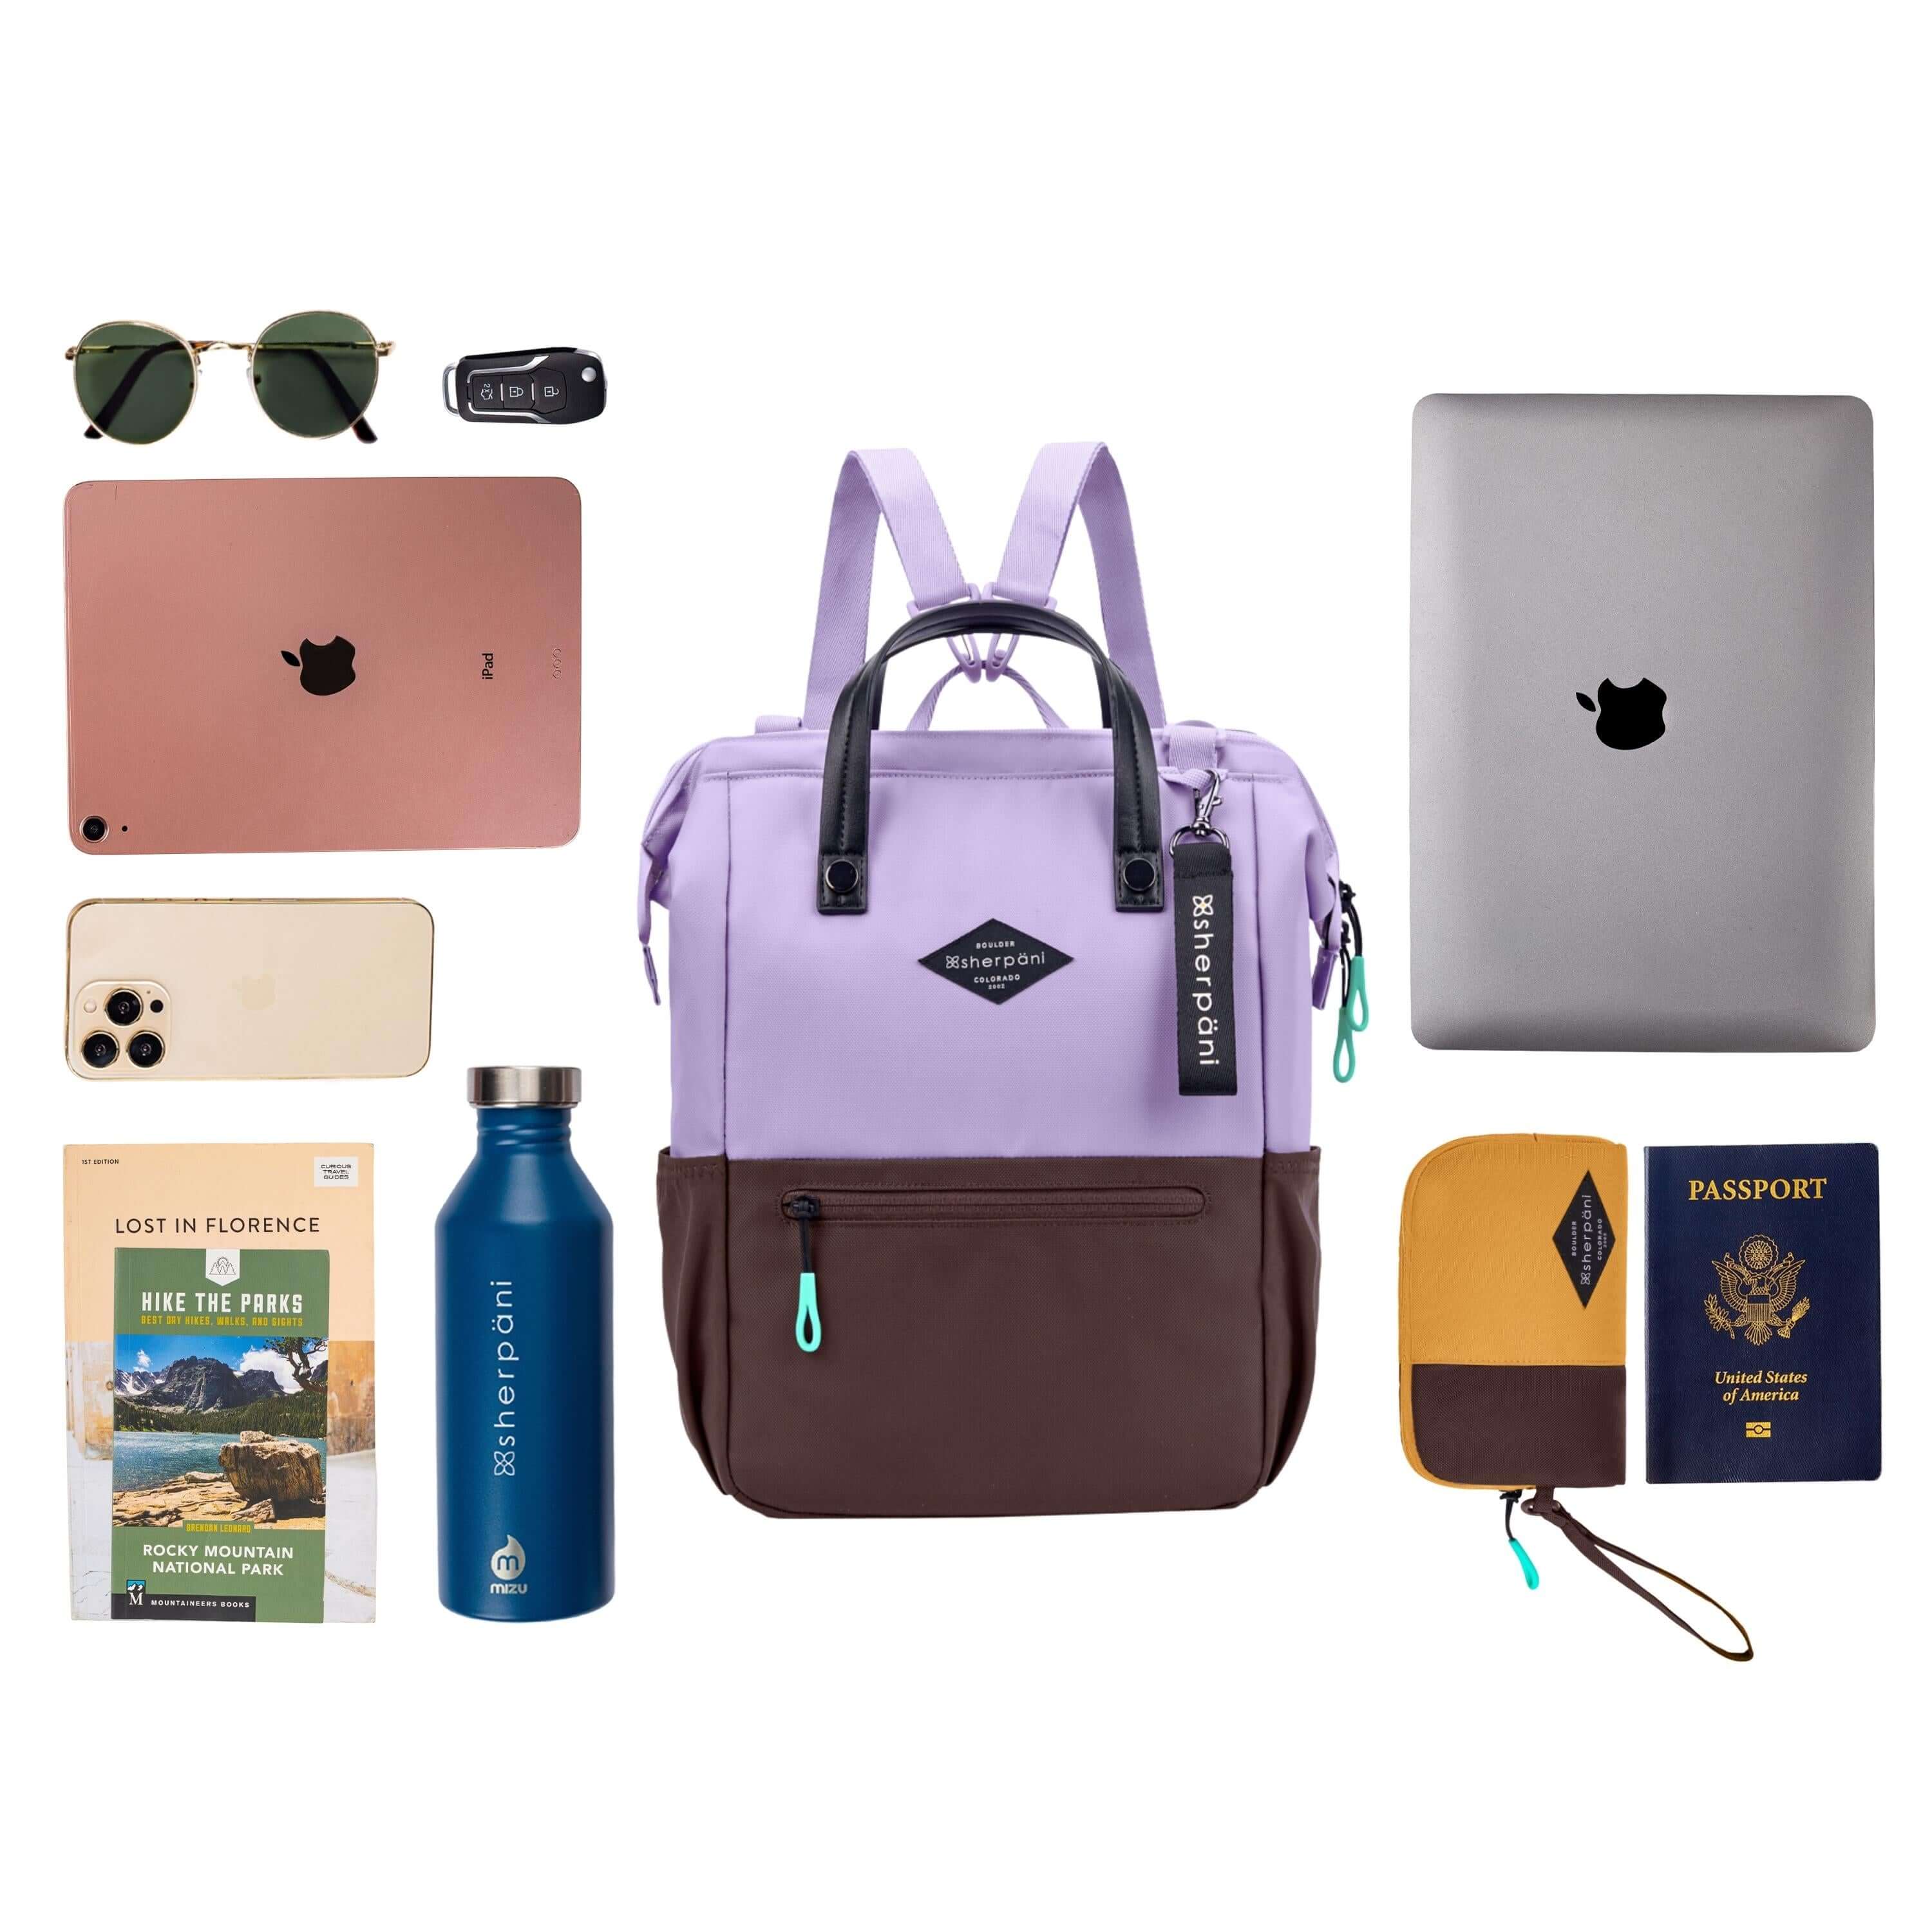 Top view of example items to fill the bag. Sherpani three-in-one bag, the Dispatch in Lavender, lies in the center. It is surrounded by an assortment of items: sunglasses, car key, laptop, phone, travel guidebooks, water bottle, laptop, passport and Sherpani travel accessory the Jolie in Sundial. 